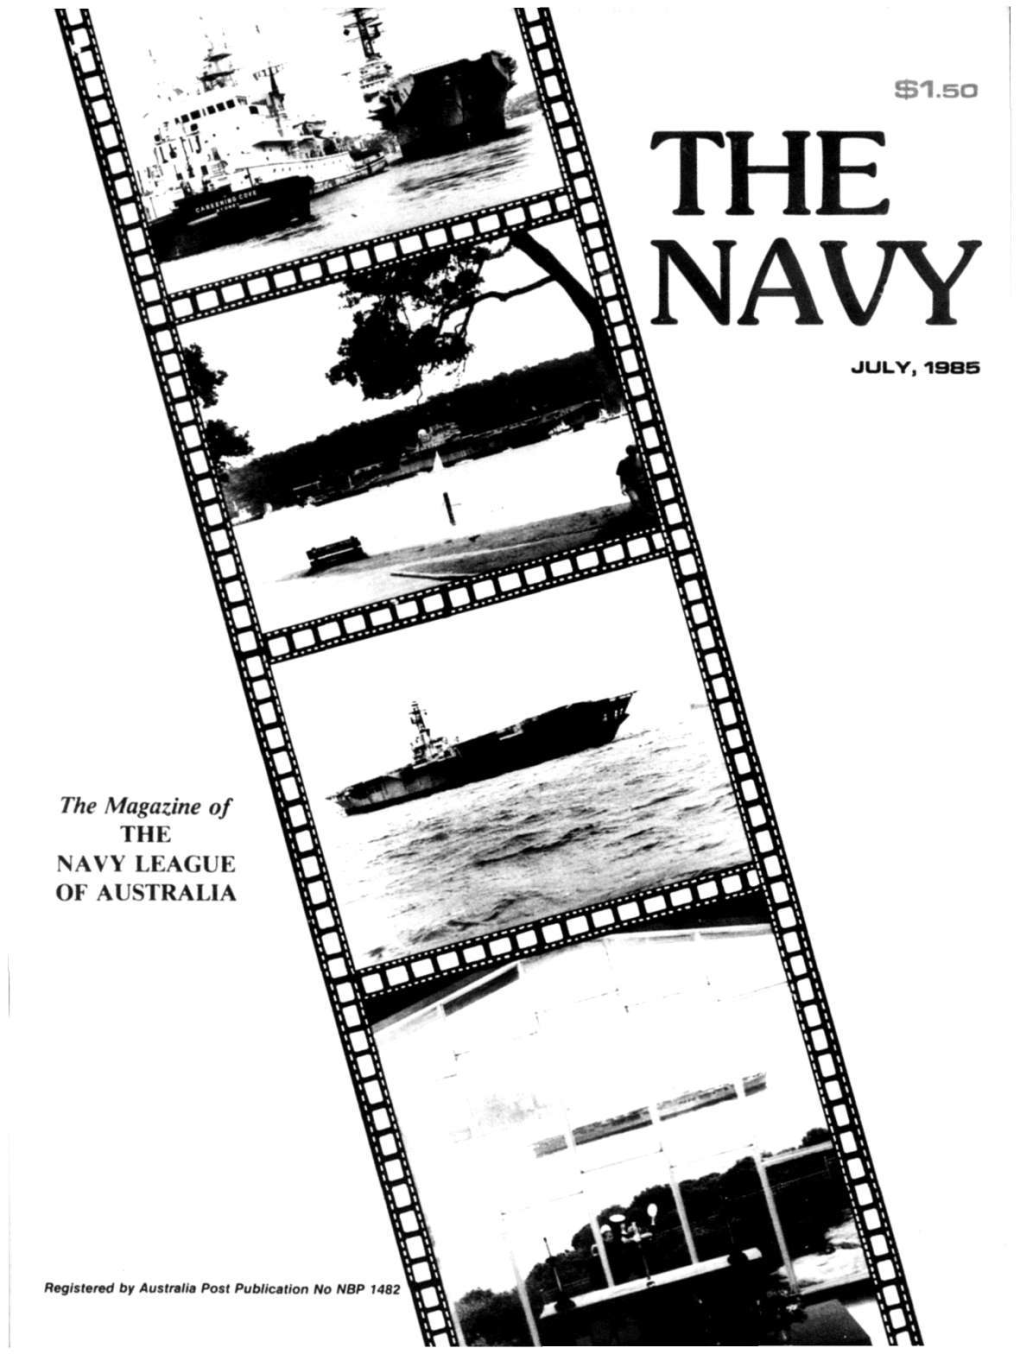 The Navy Vol 47 Part 2 1985 (Jul and Oct 1985)